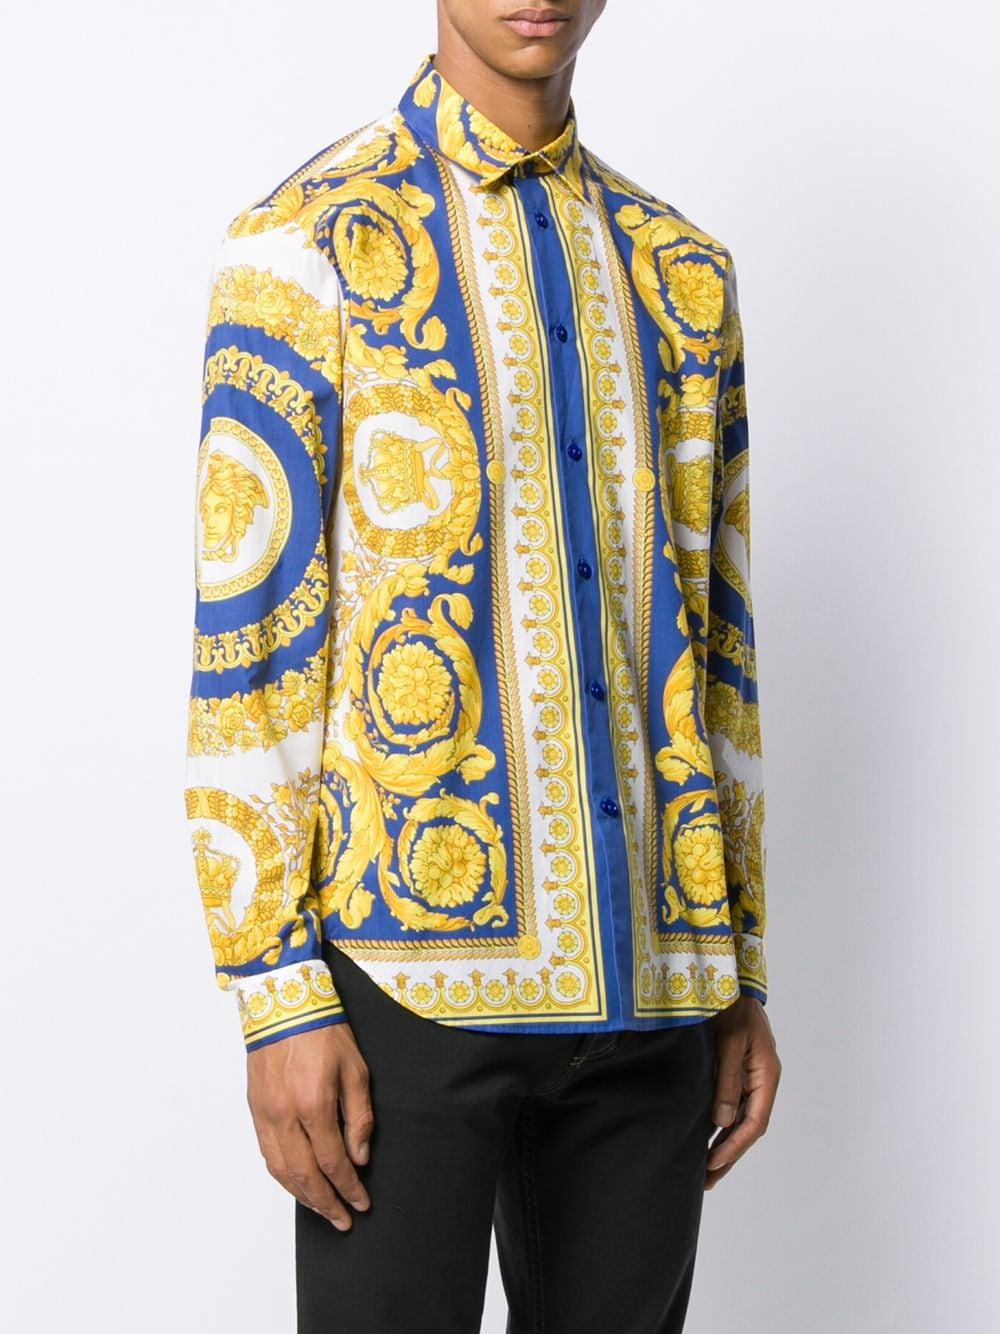 Versace Cotton Baroque Print Shirt in Yellow for Men - Lyst